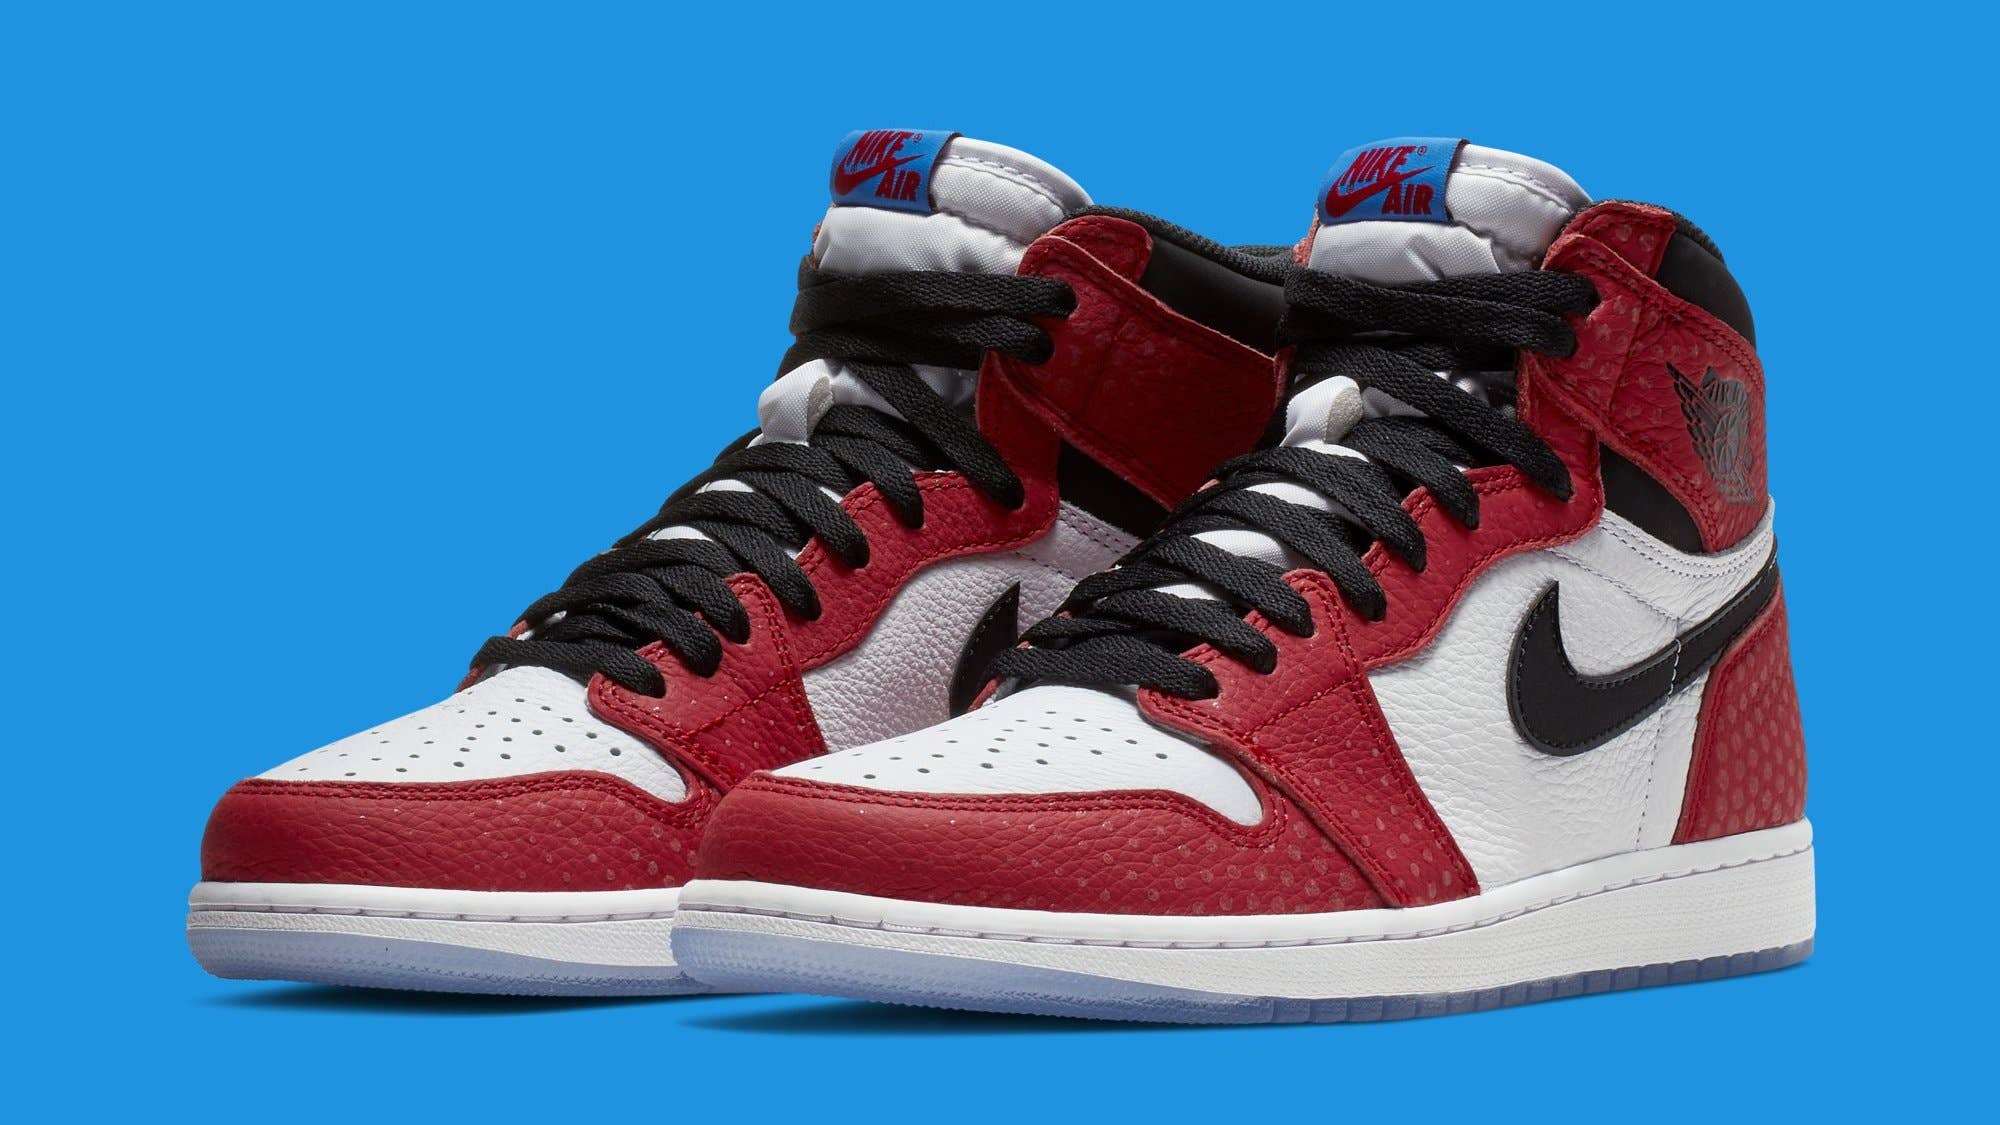 The Complete History of Air Jordan 1 Collabs